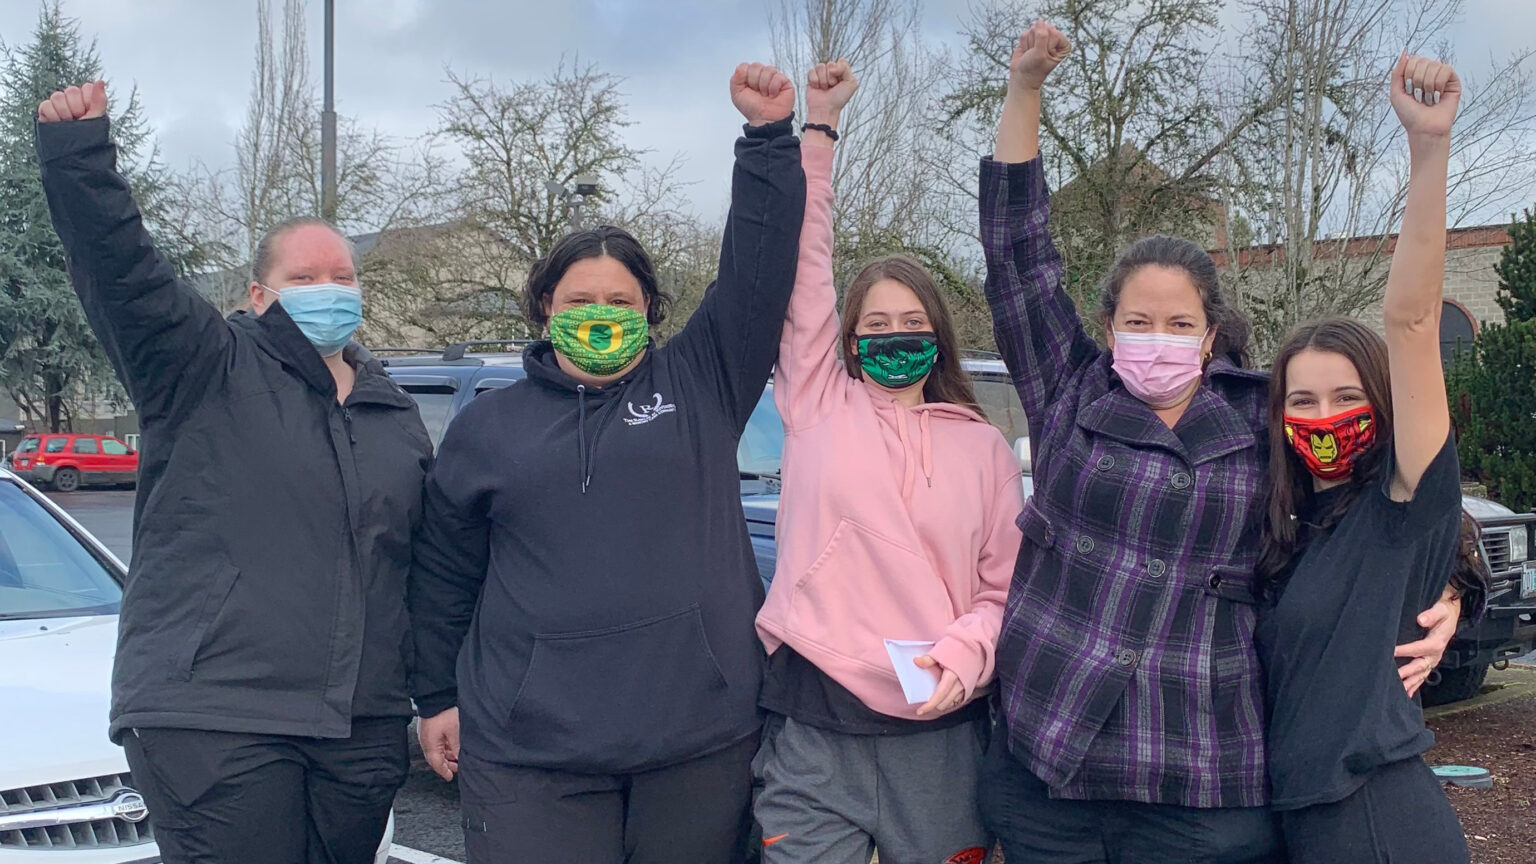 5 Rawlins workers shown wearing masks with their fists in the air